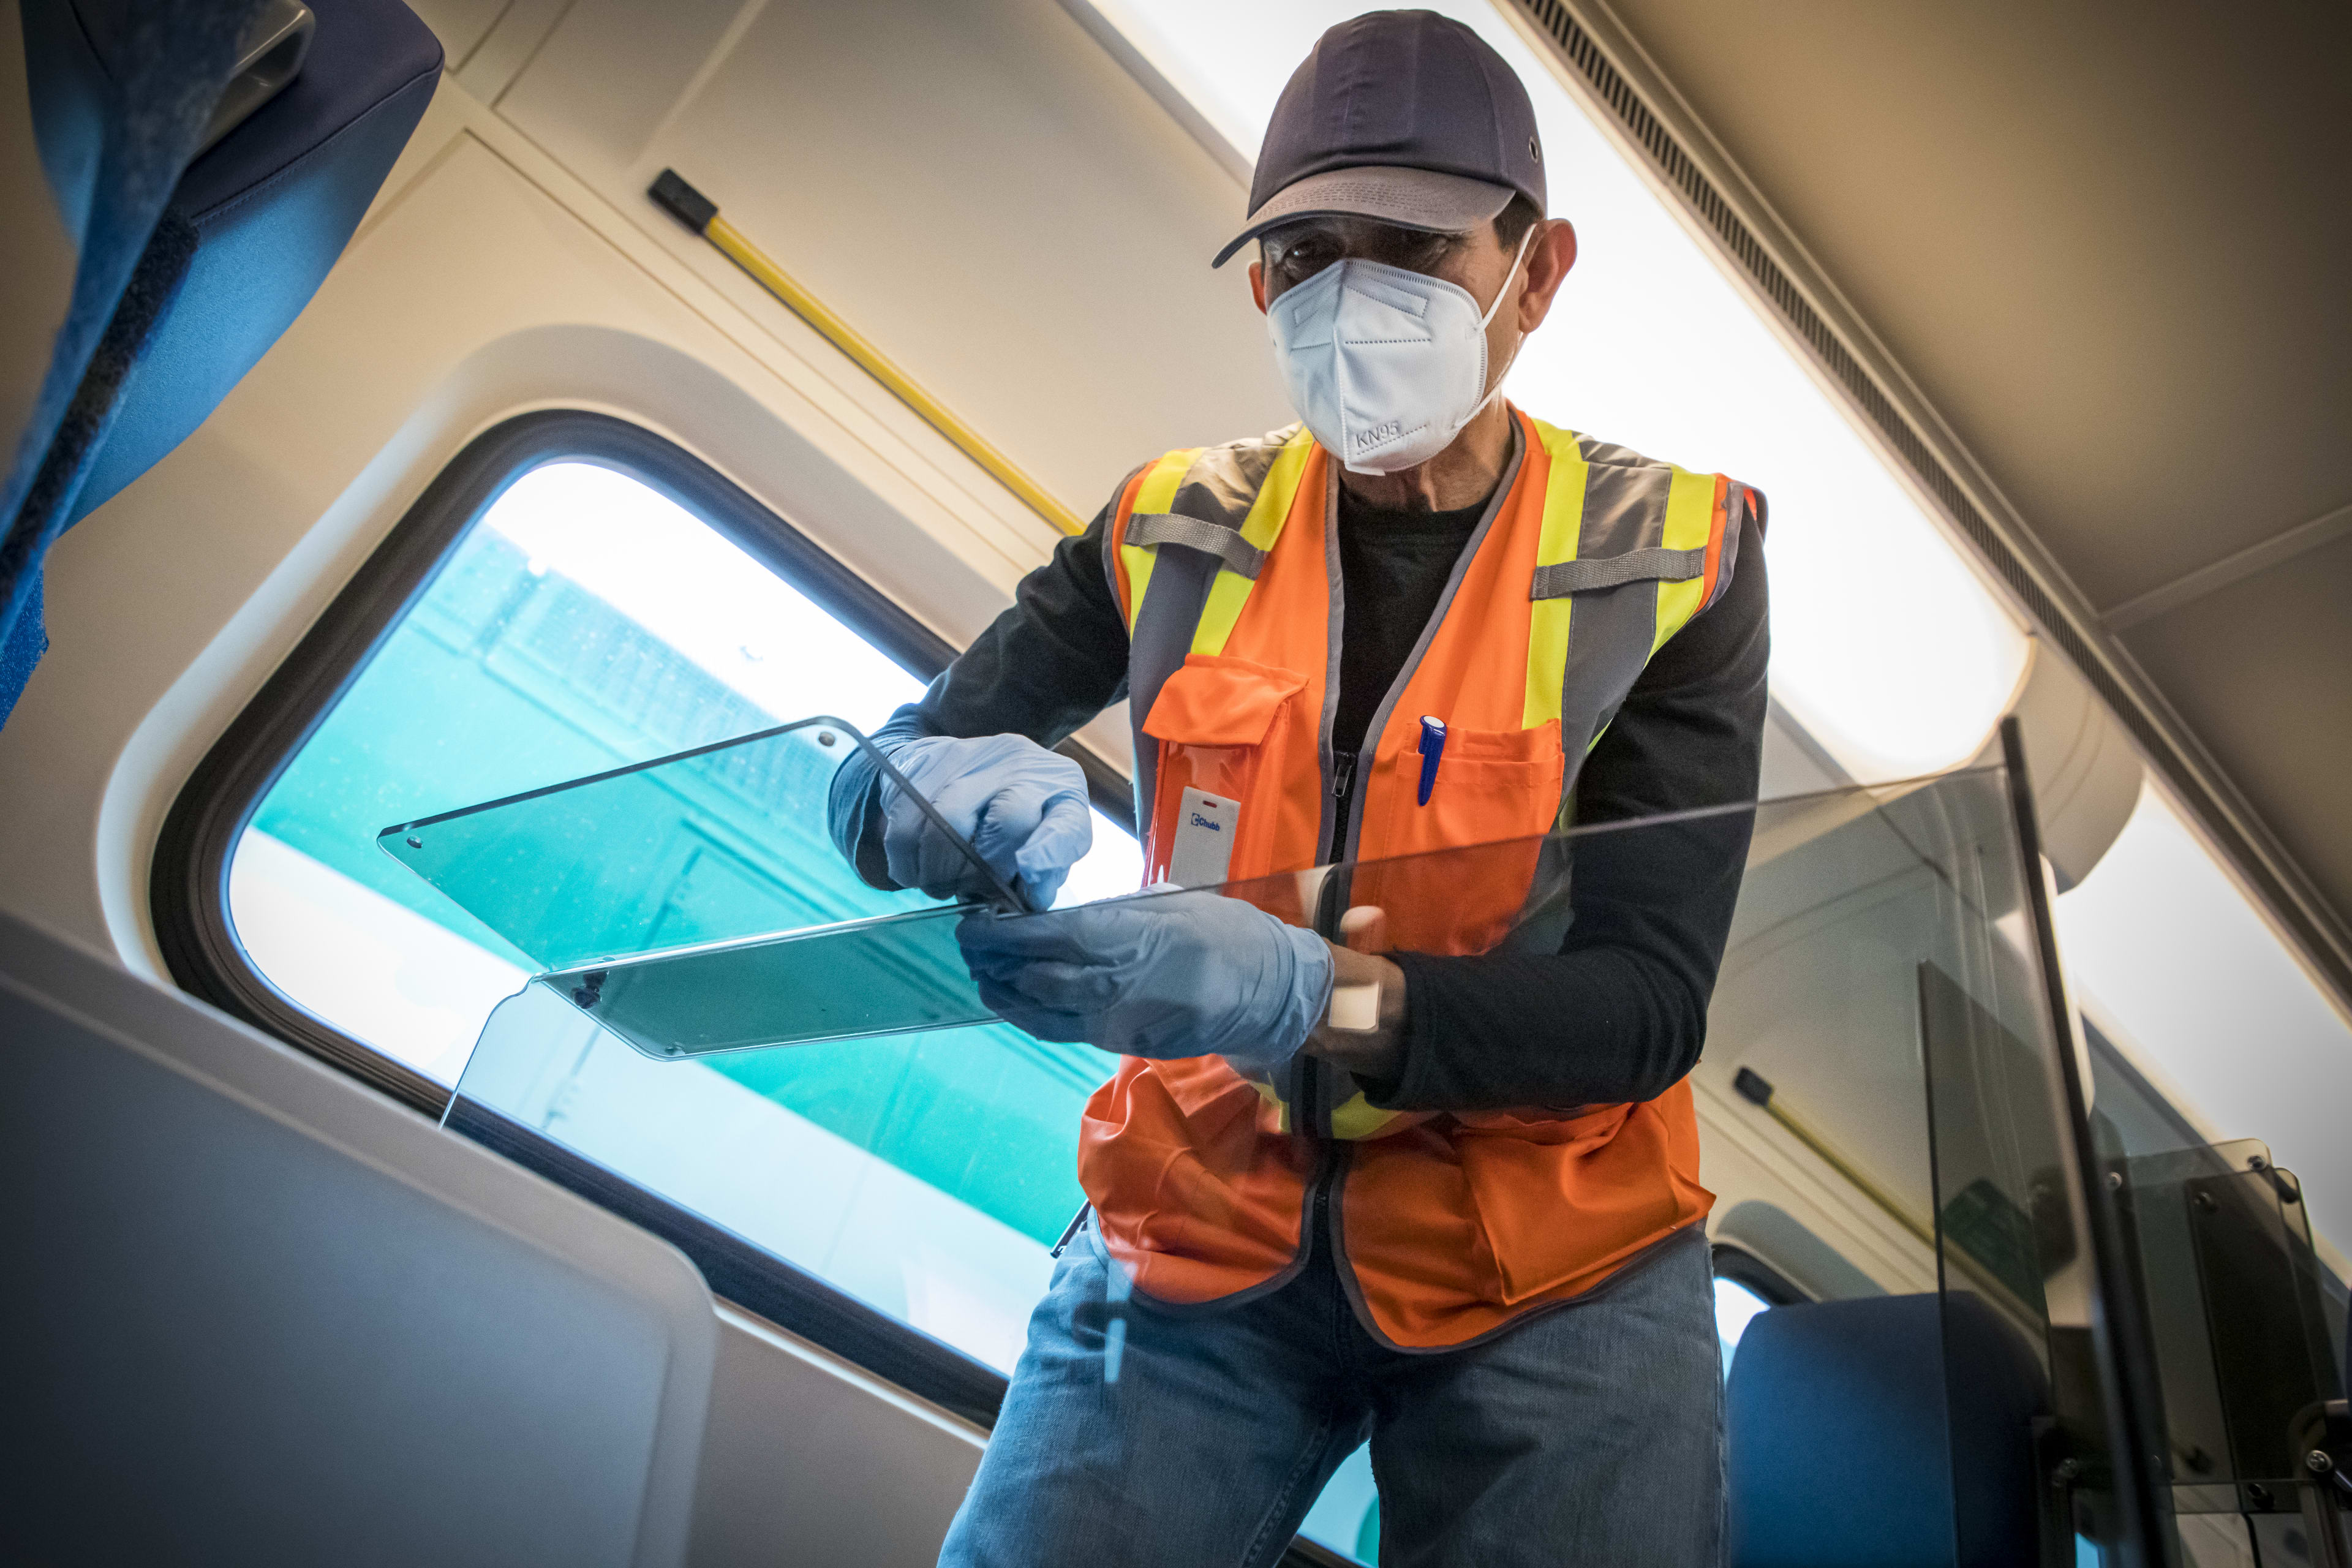 A man helps to attach a glass barrier next to a seat on a train.